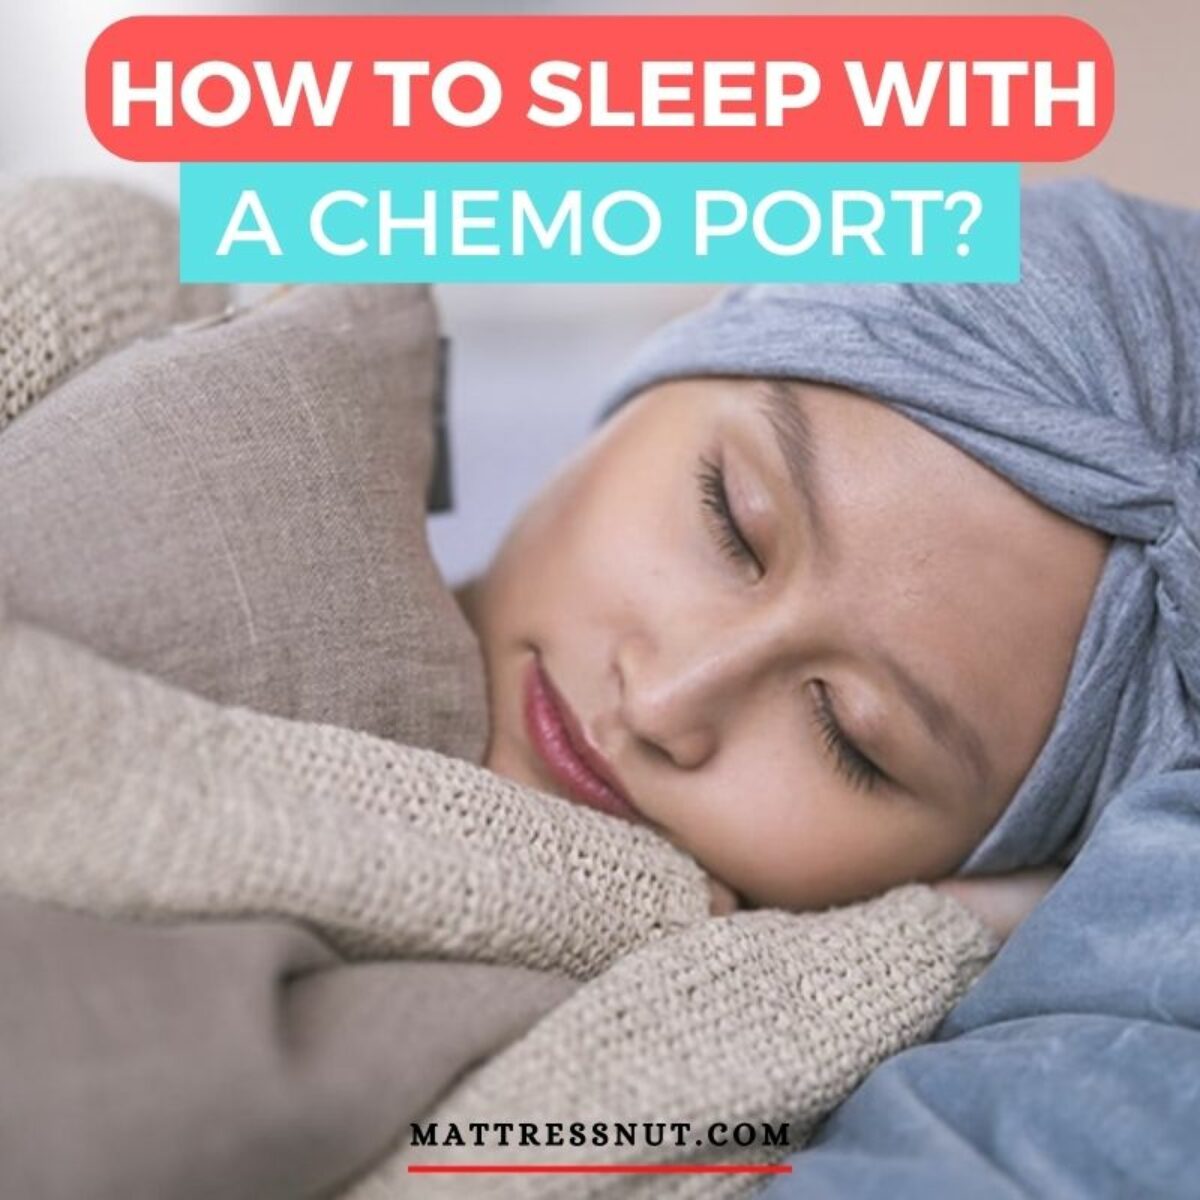 How to sleep with a chemo port? Our in-depth guide with tips and tricks